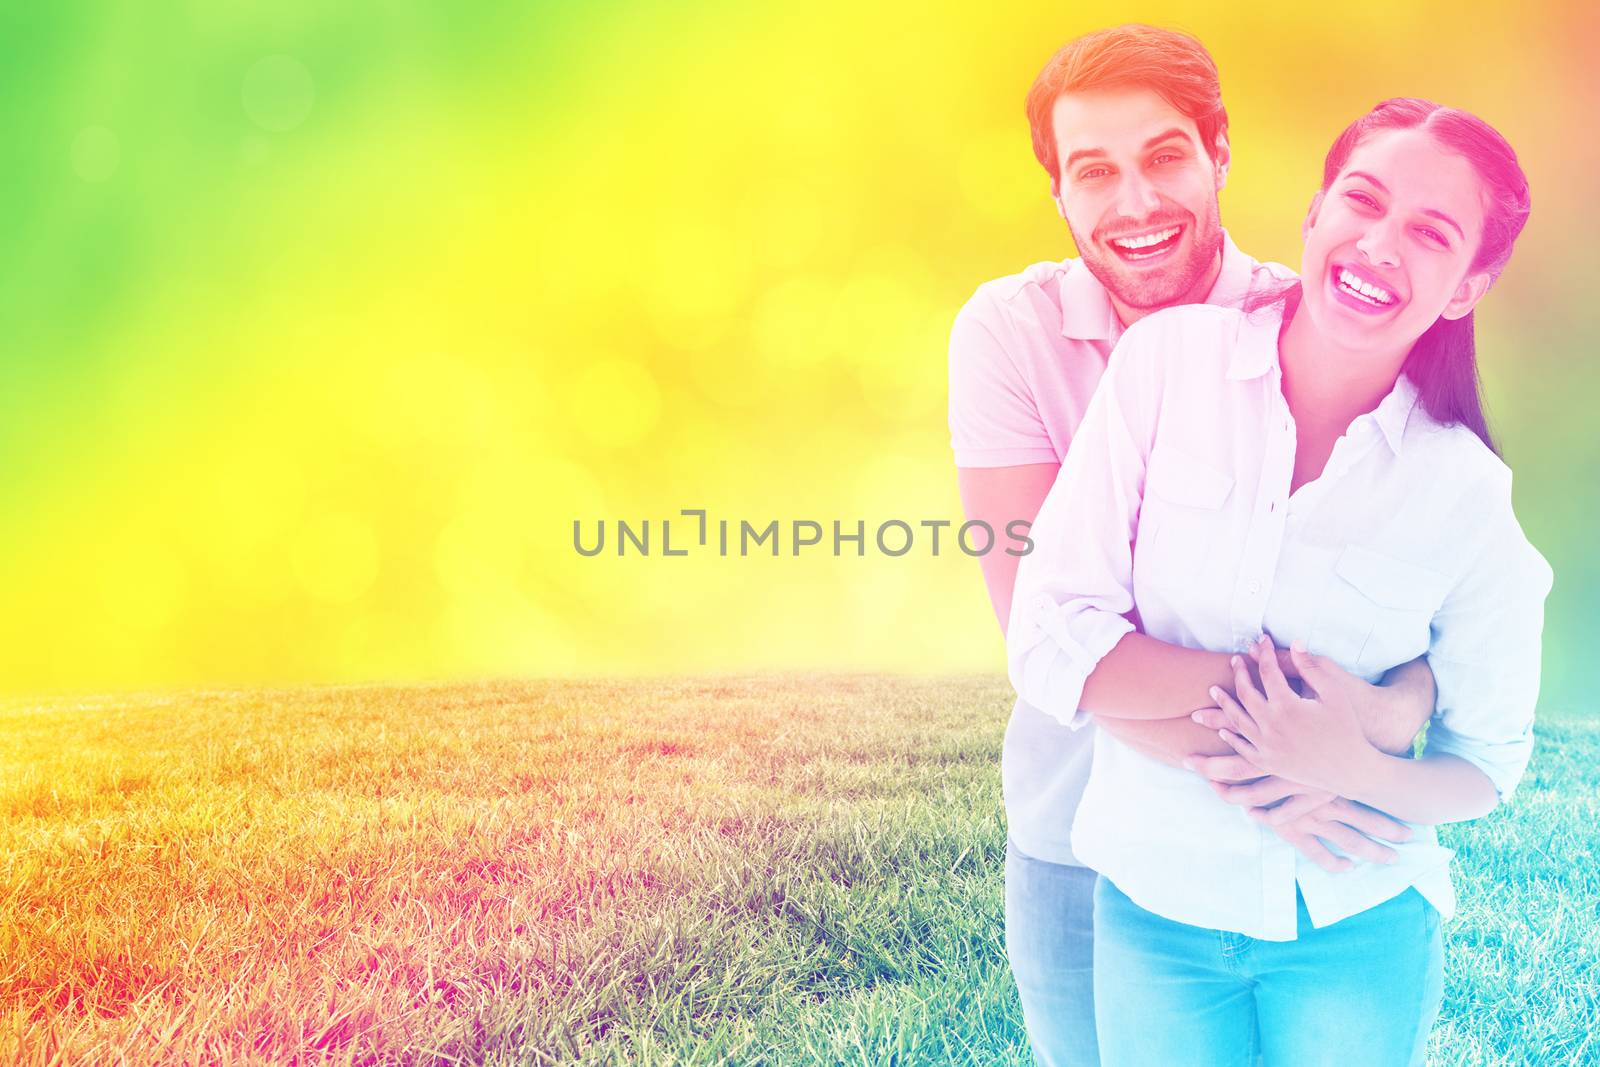 Cute couple hugging and smiling at camera against field against glowing lights